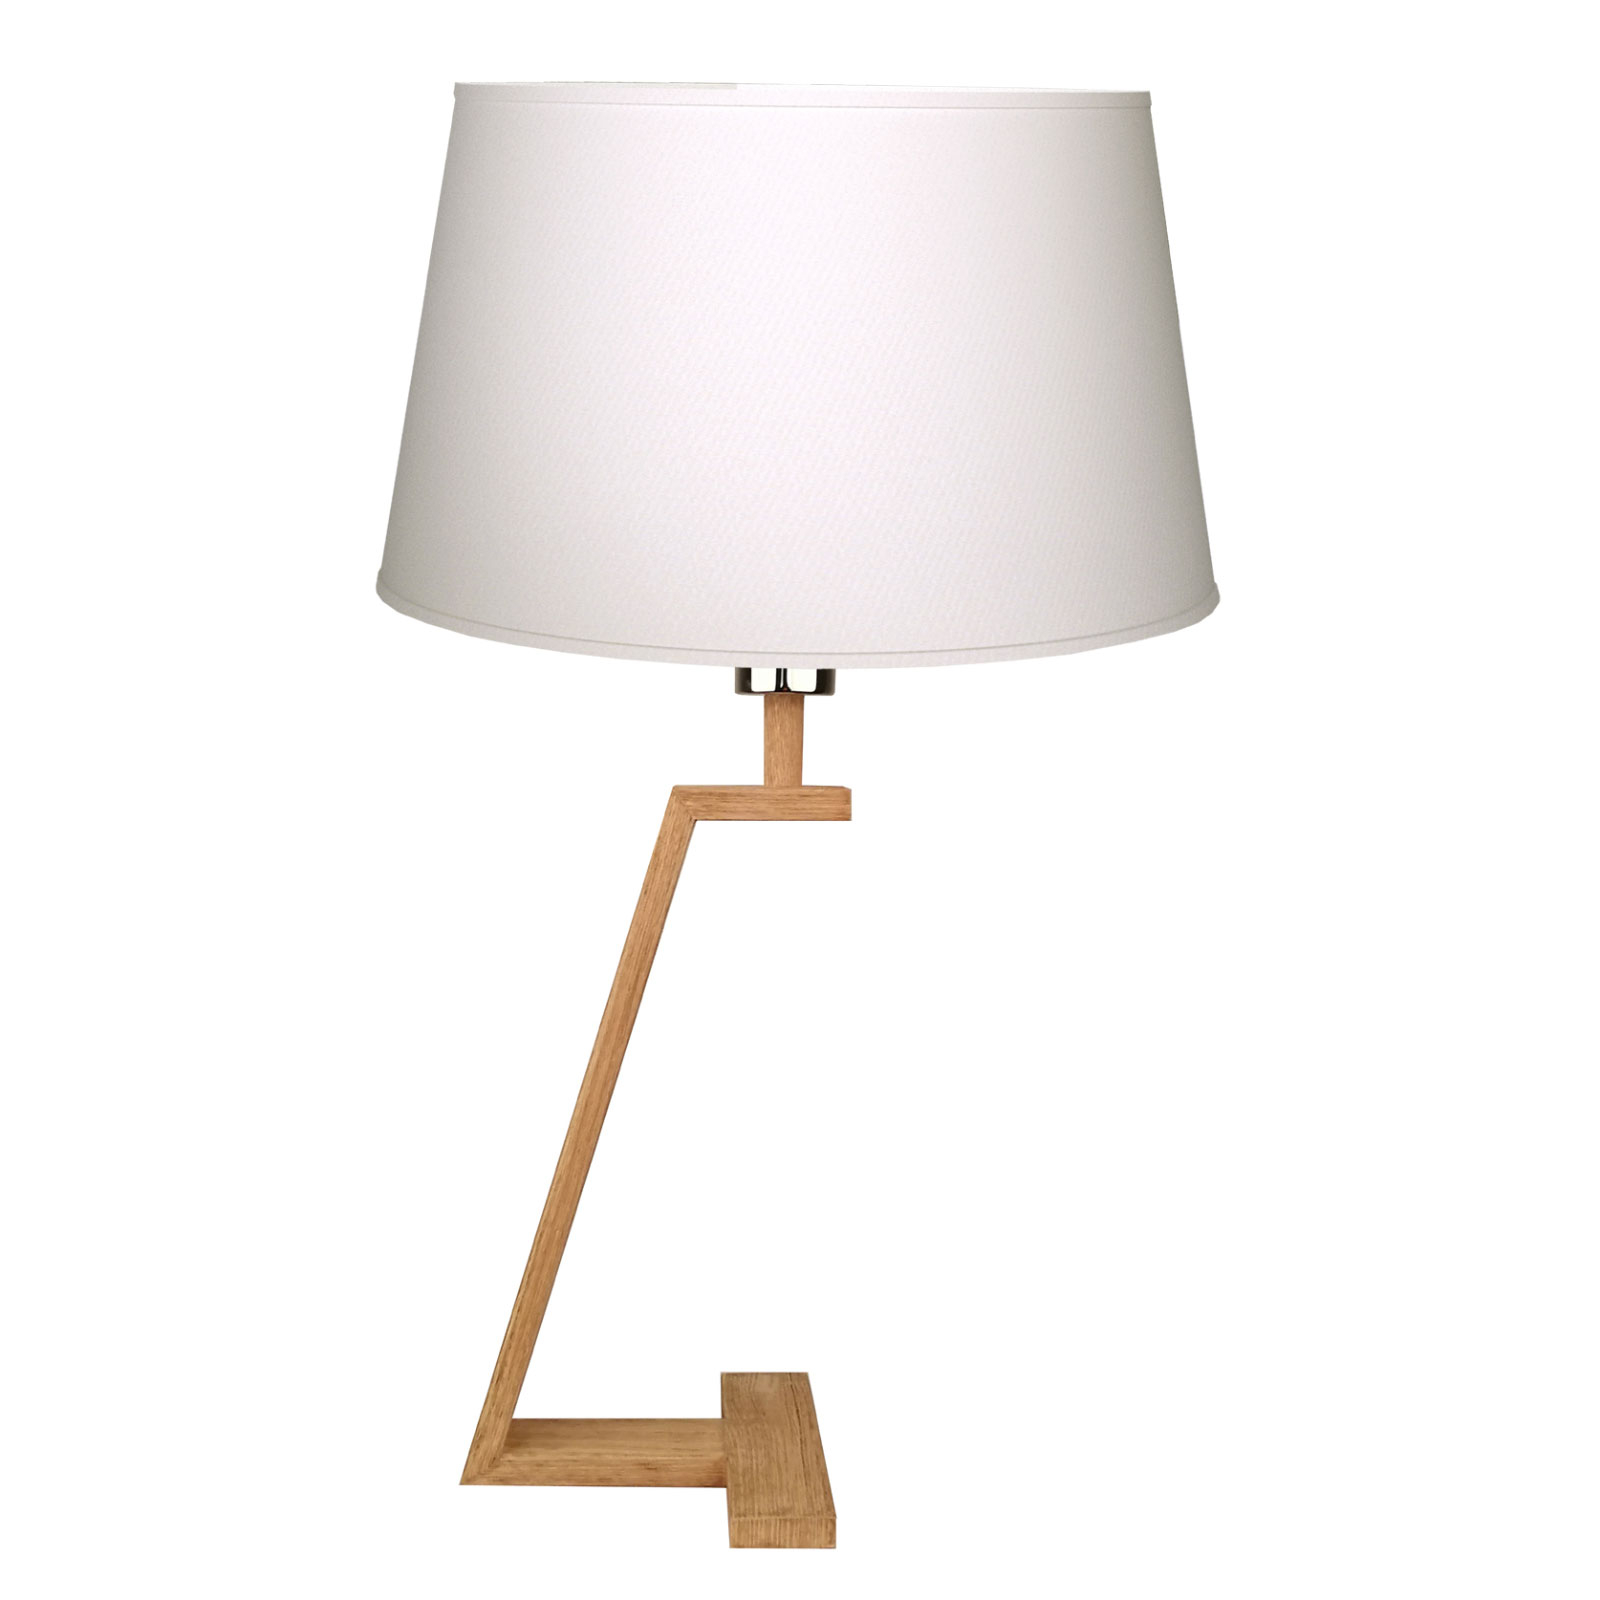 Memphis LT table lamp, wood and fabric, white